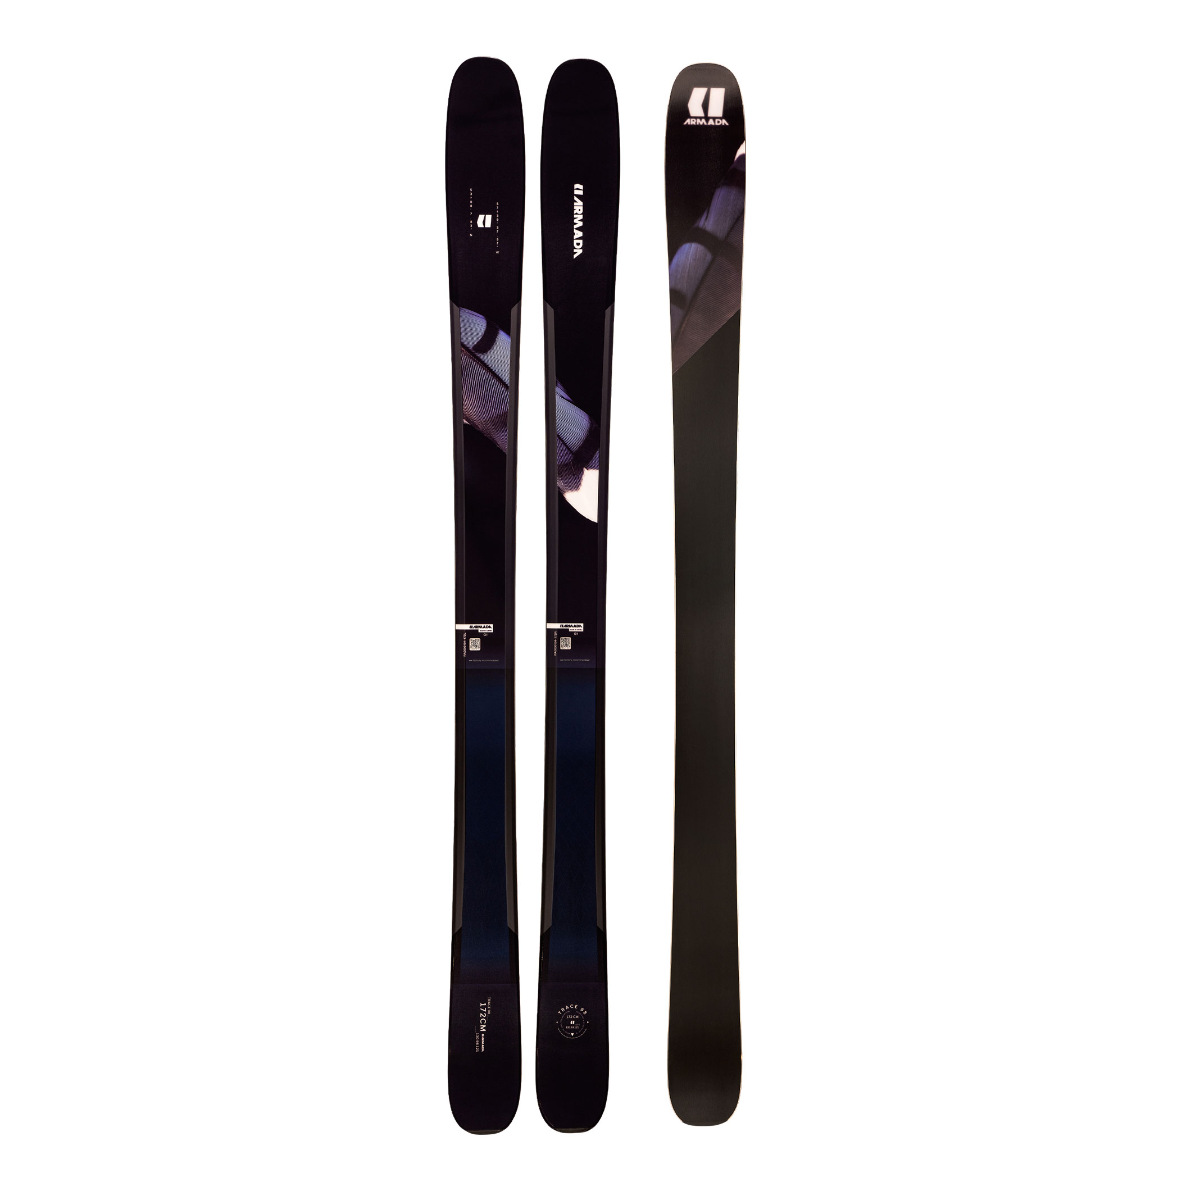 2021 Armada Trace 98 Skis | The BackCountry in Truckee, CA - The